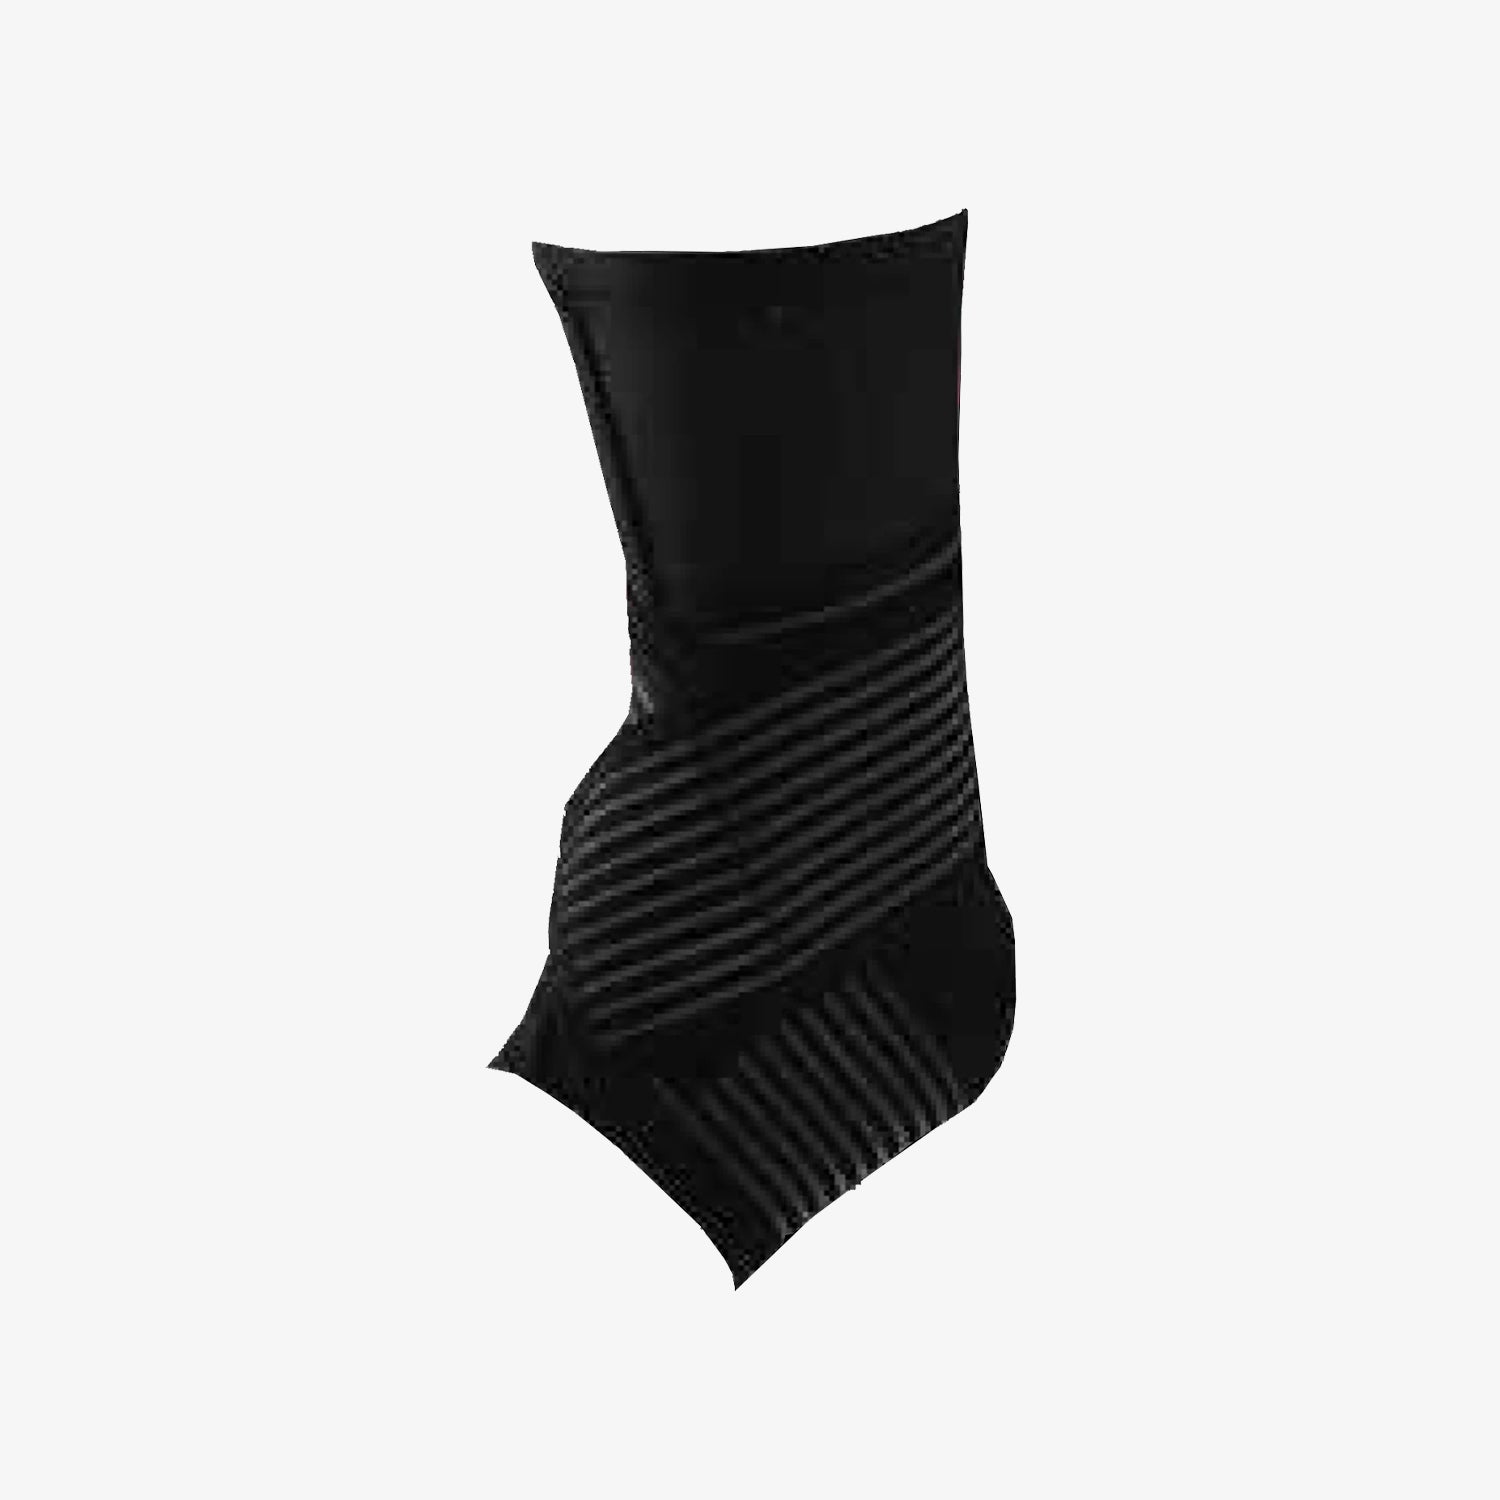 Ankle Support Small - Black